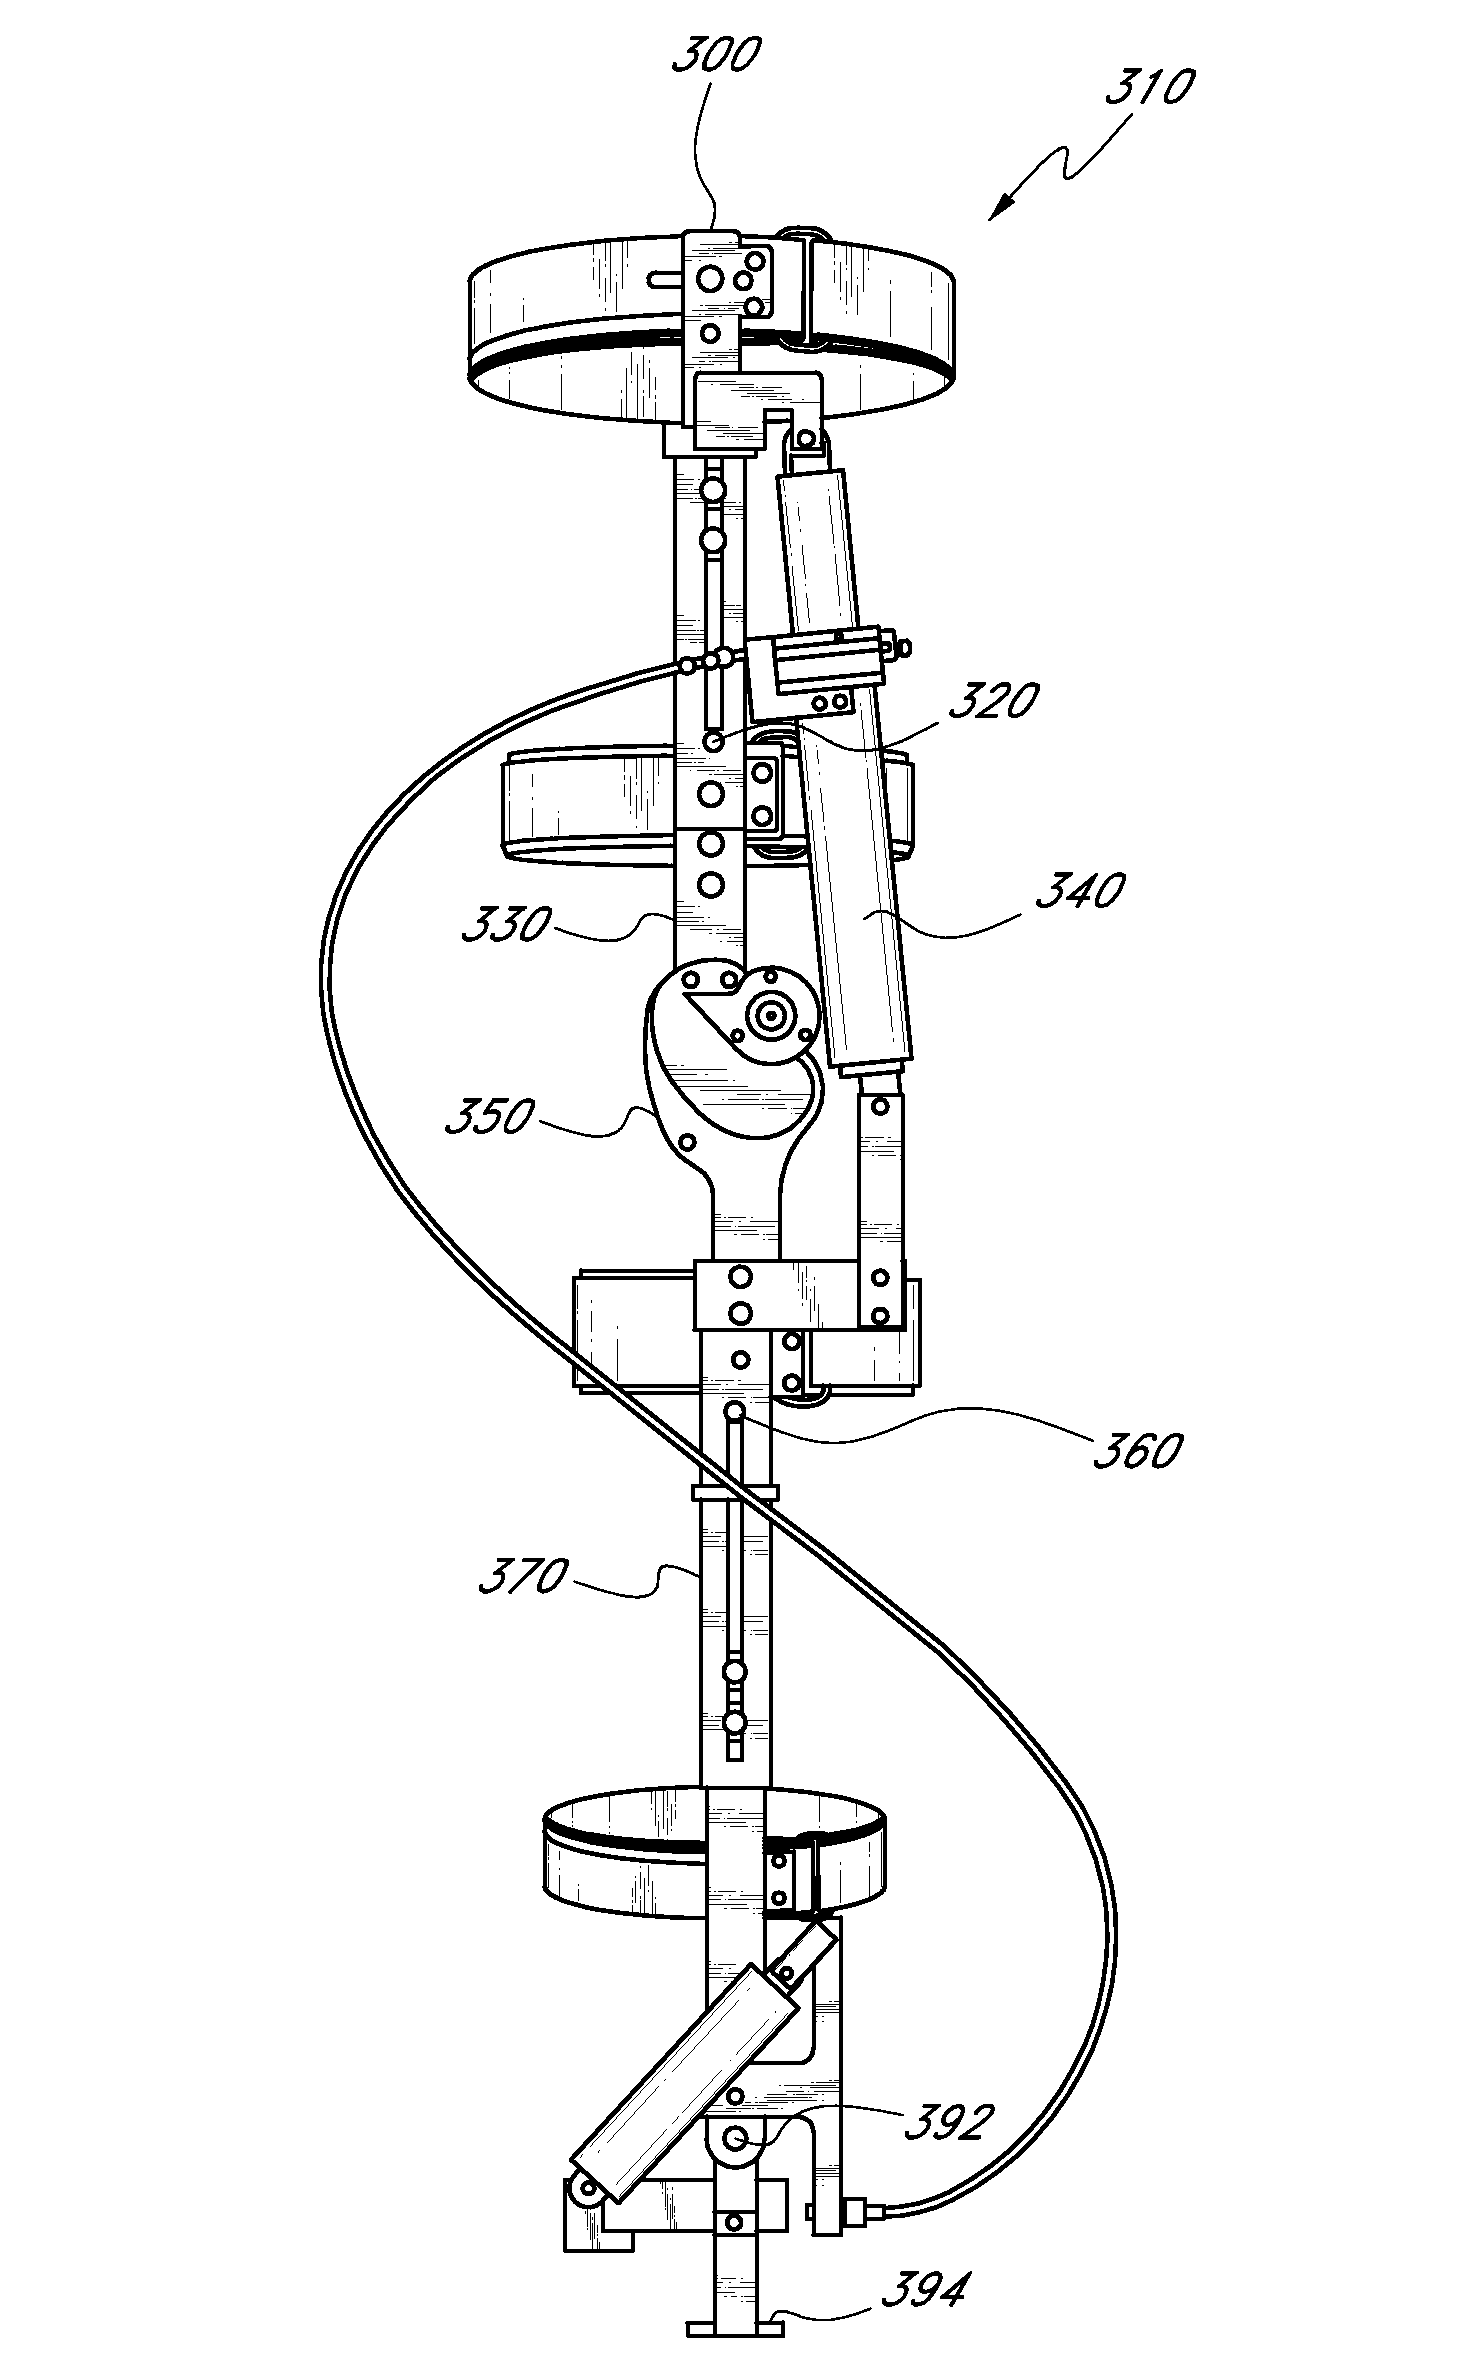 Feedback control systems and methods for prosthetic or orthotic devices